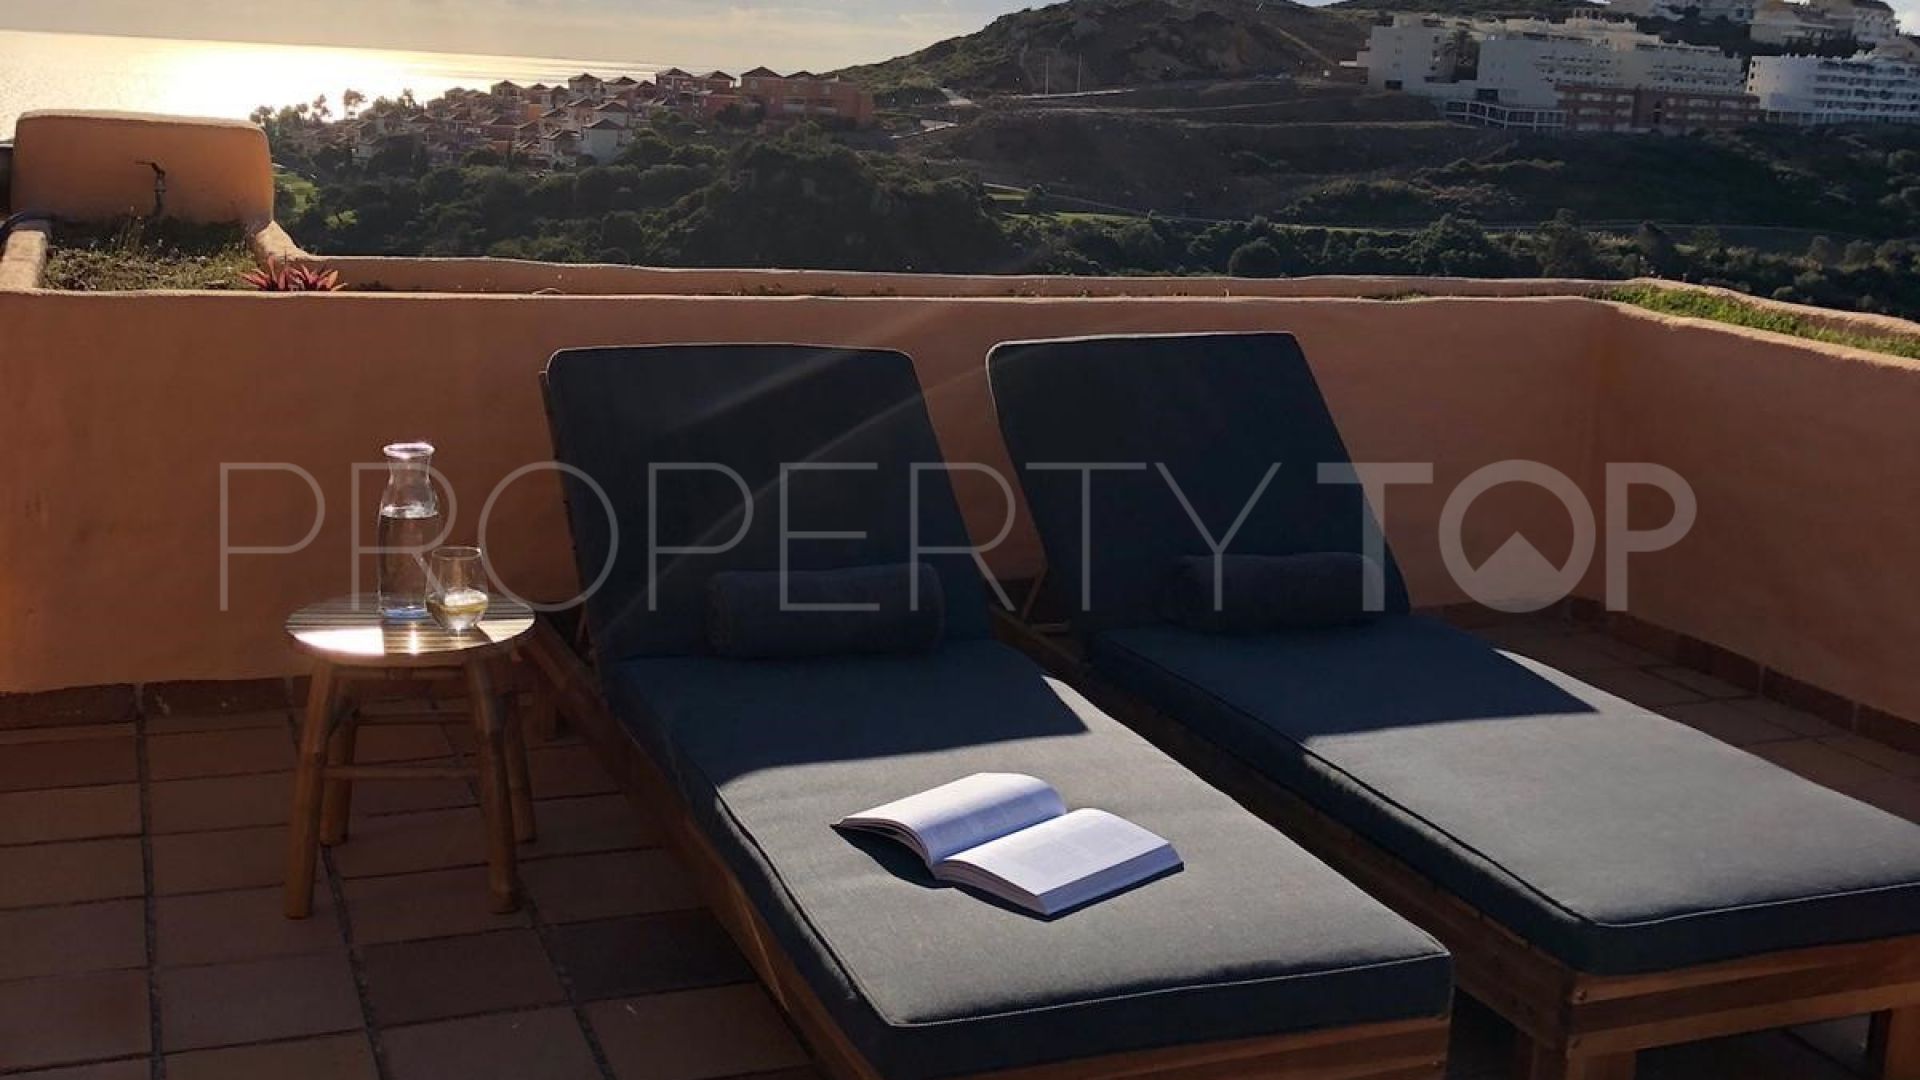 For sale 3 bedrooms penthouse in Sabinillas